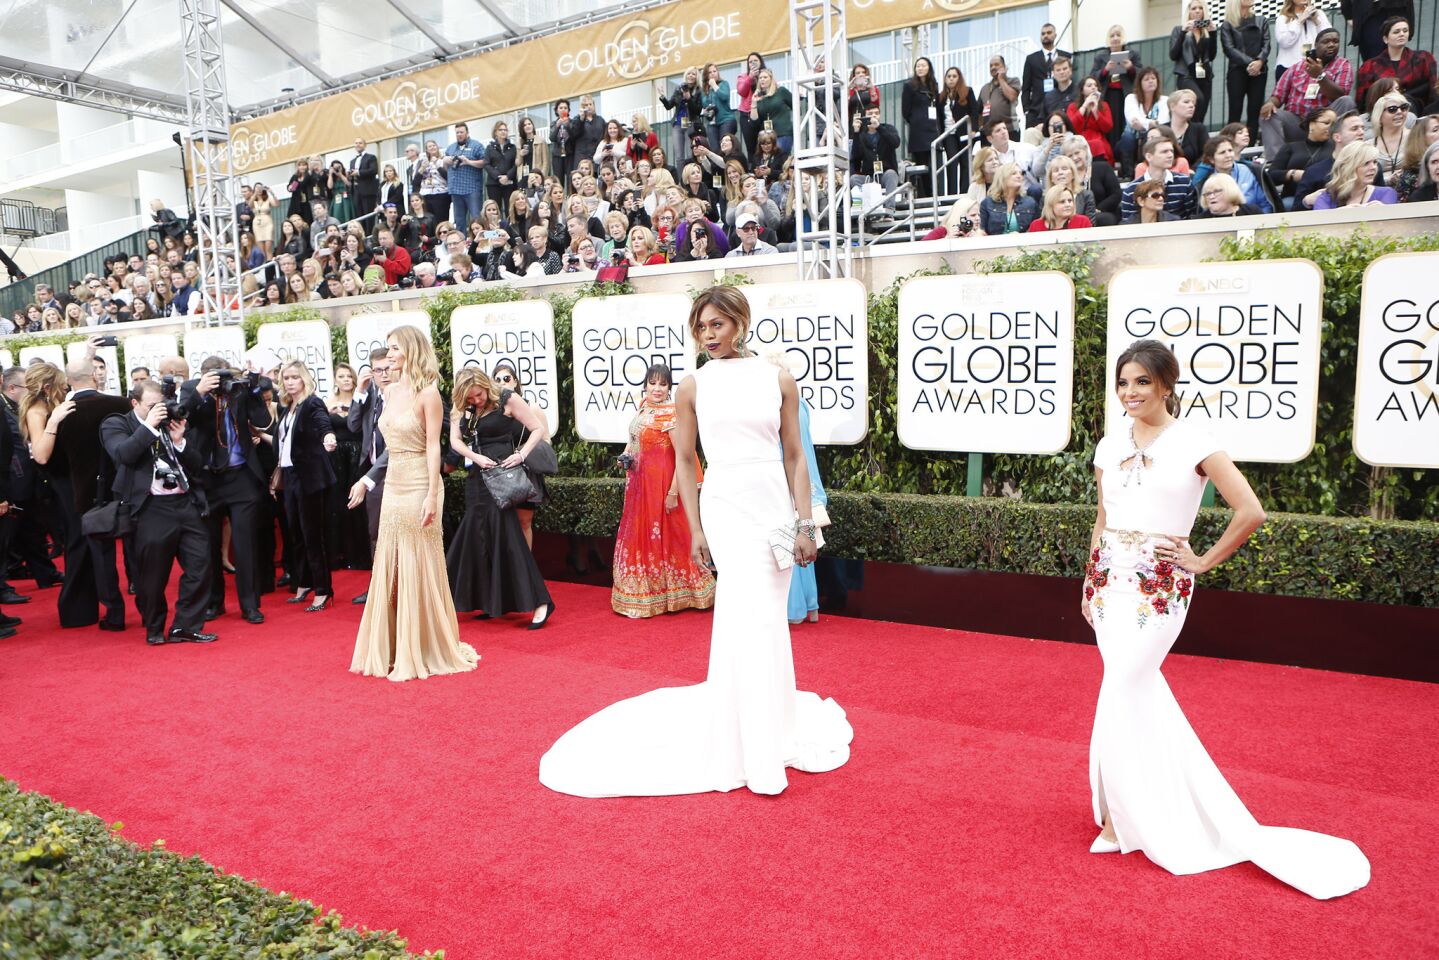 Rosie Huntington-Whiteley, from left, Laverne Cox and Eva Longoria on the red carpet.